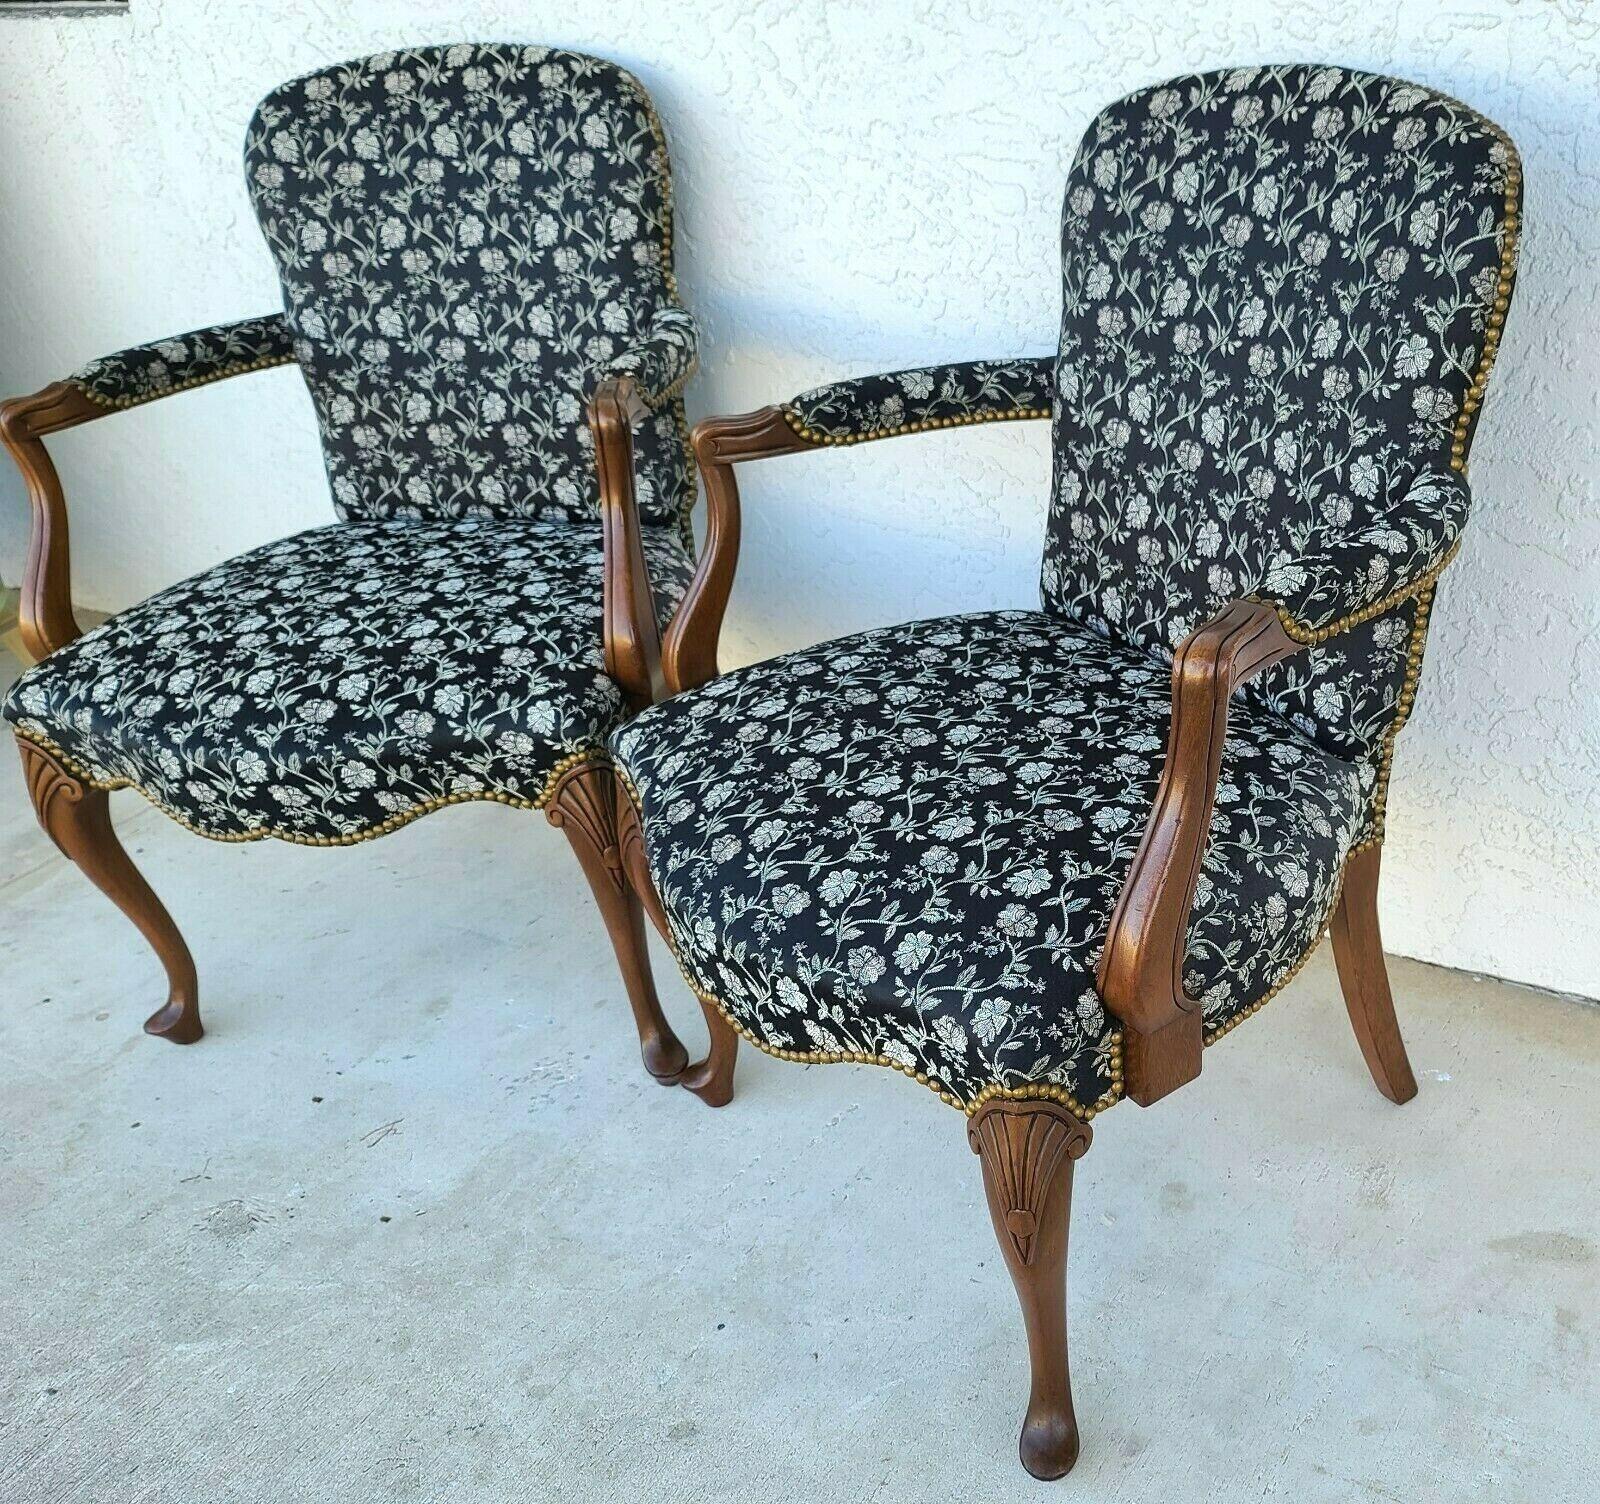 Offering one of our recent palm beach estate fine furniture acquisitions of a
Pair of vintage French country provincial walnut Fauteuil brass nail studded armchairs
Coloration is a very very dark blue which can look black in indoor